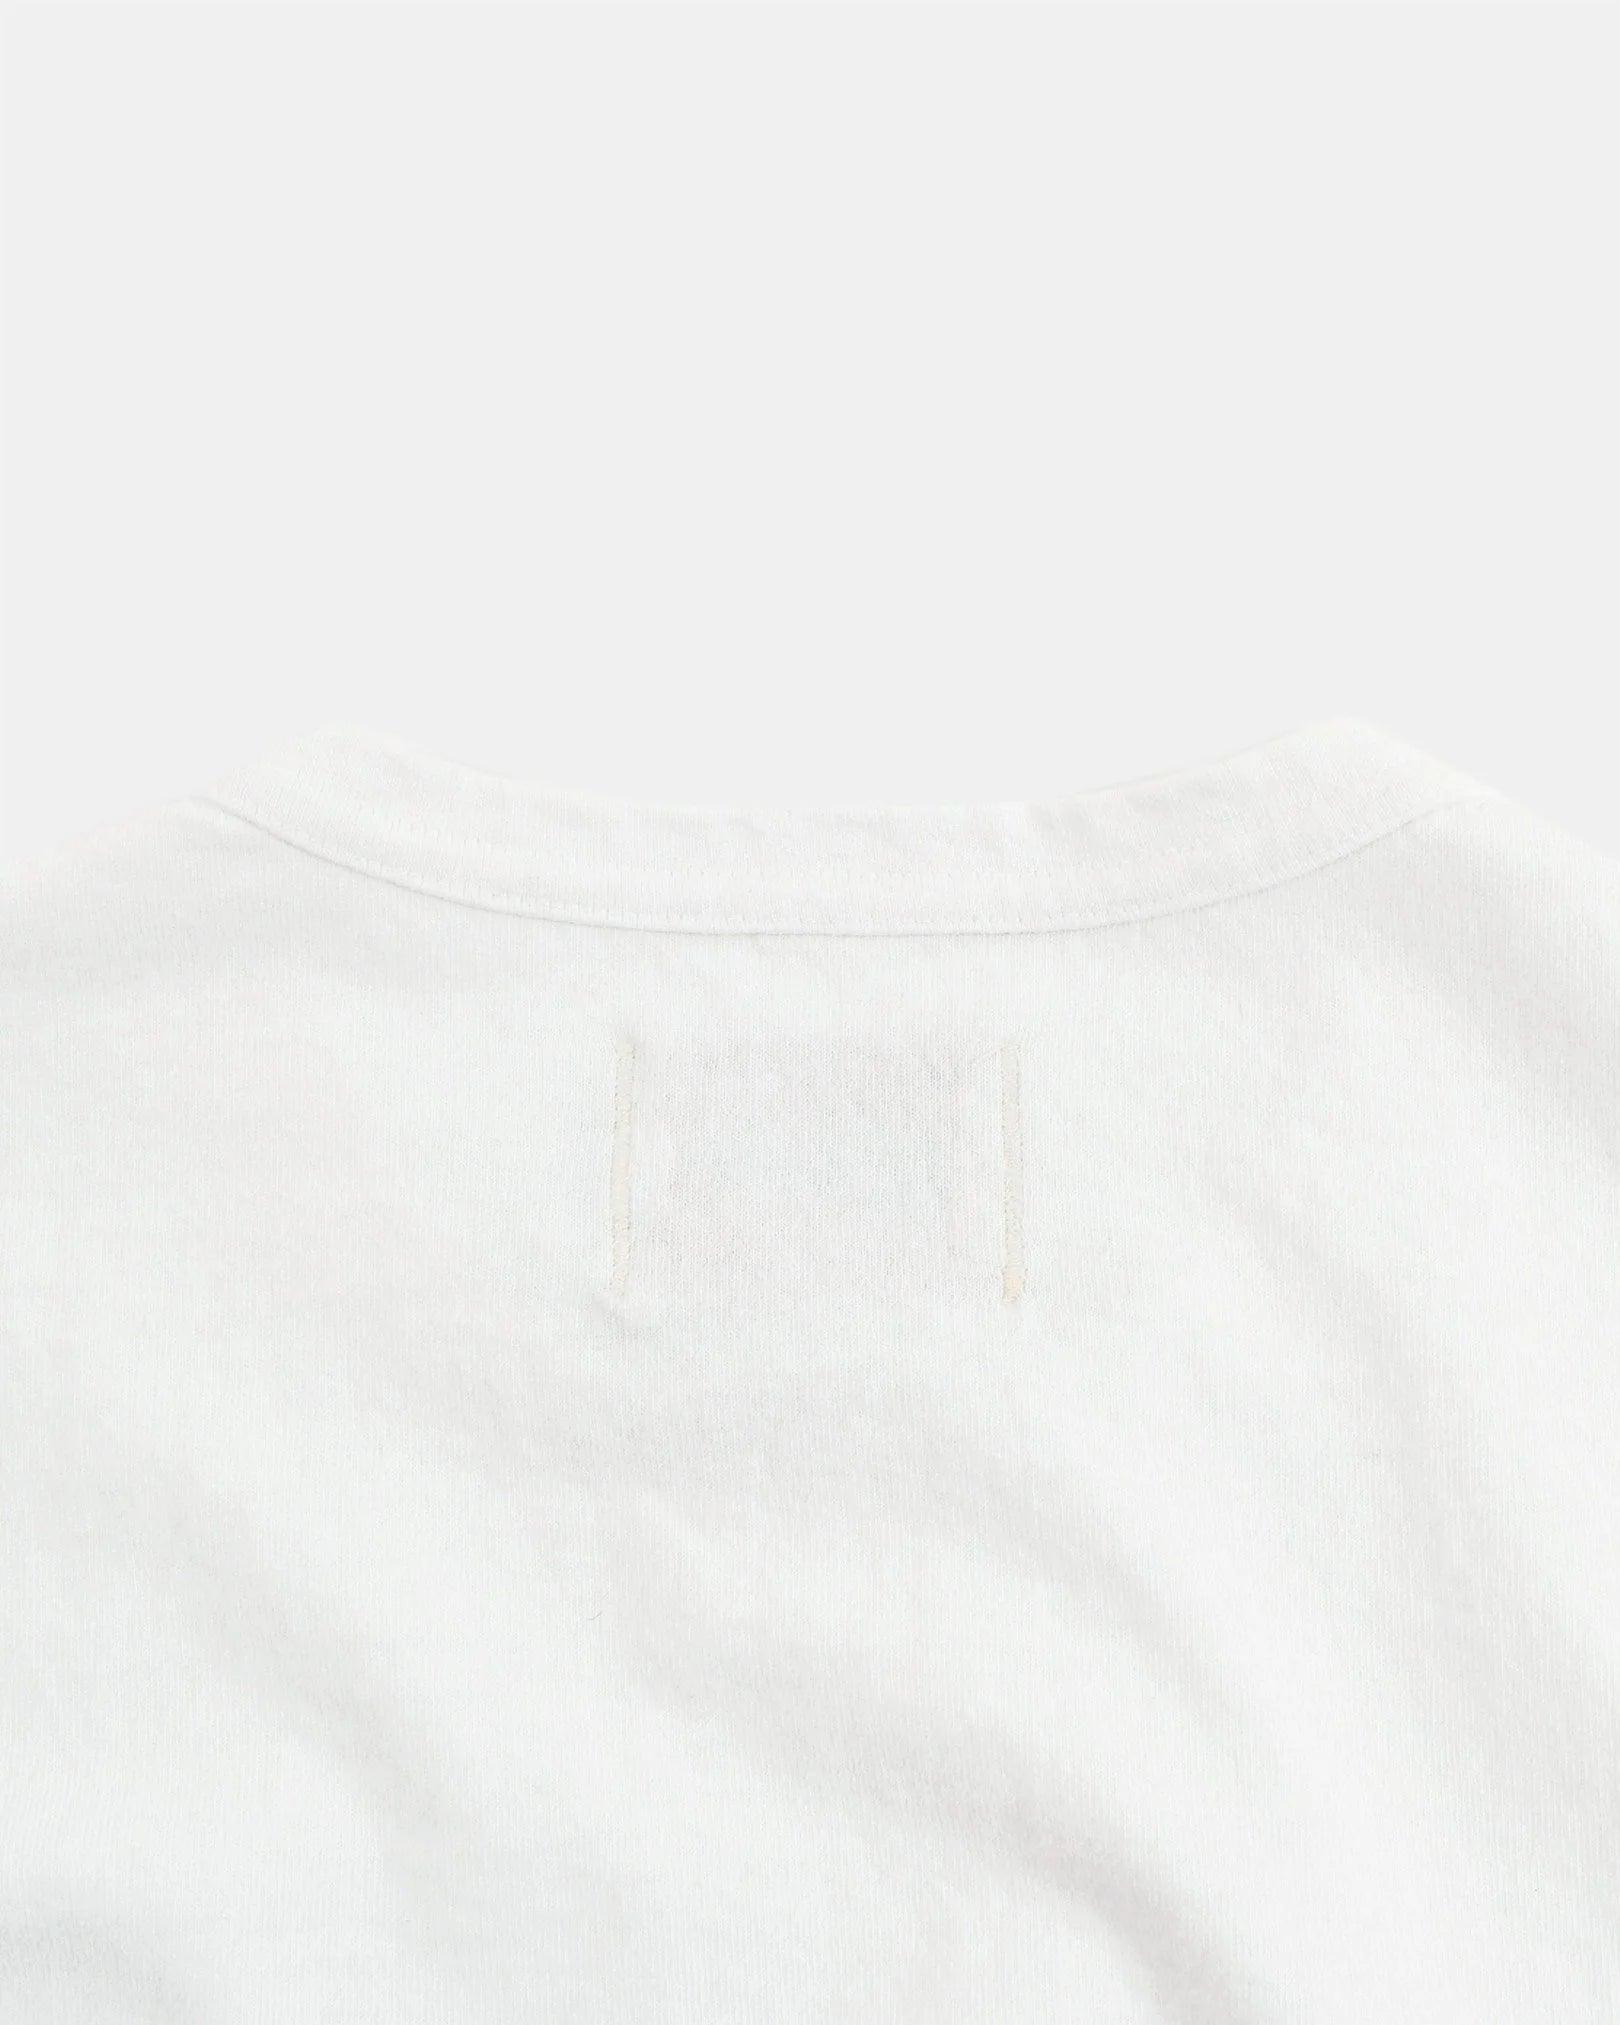 Dehen 1920 - Pocket Tee - White - Guilty Party